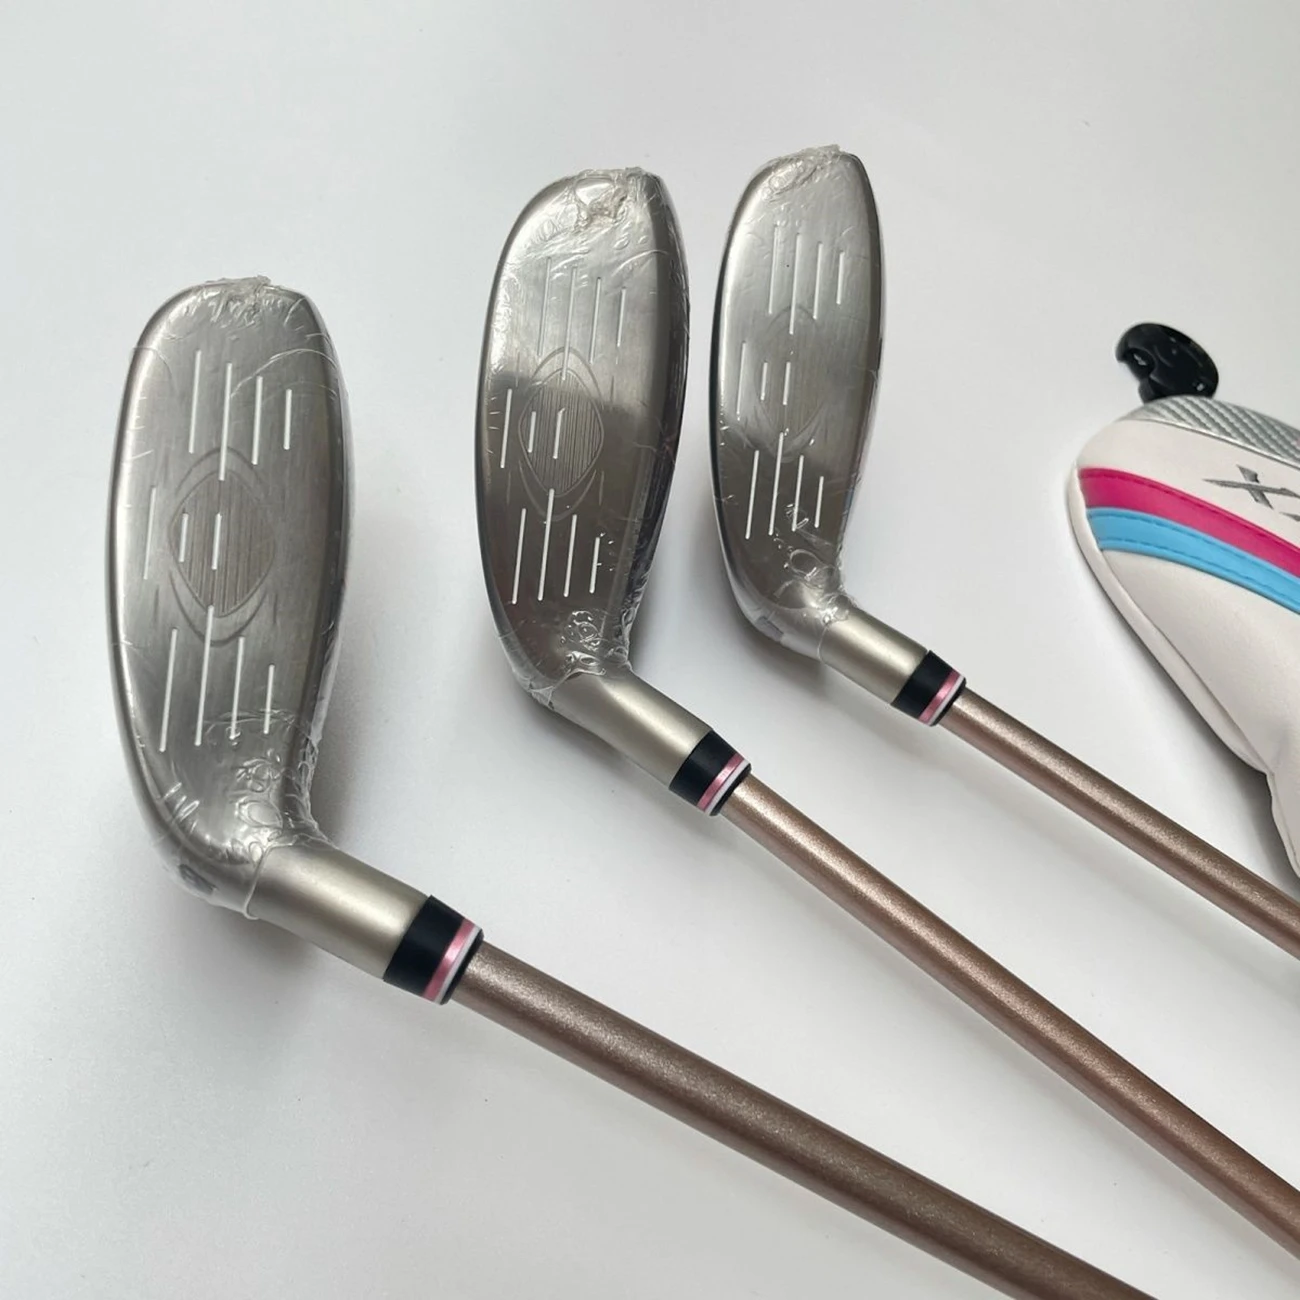 

Golf Clubs Women's 1200 Hybrids Club Golf 22/25/28 Lady Flex Graphite Shafts Including Headcovers Quick Shipping